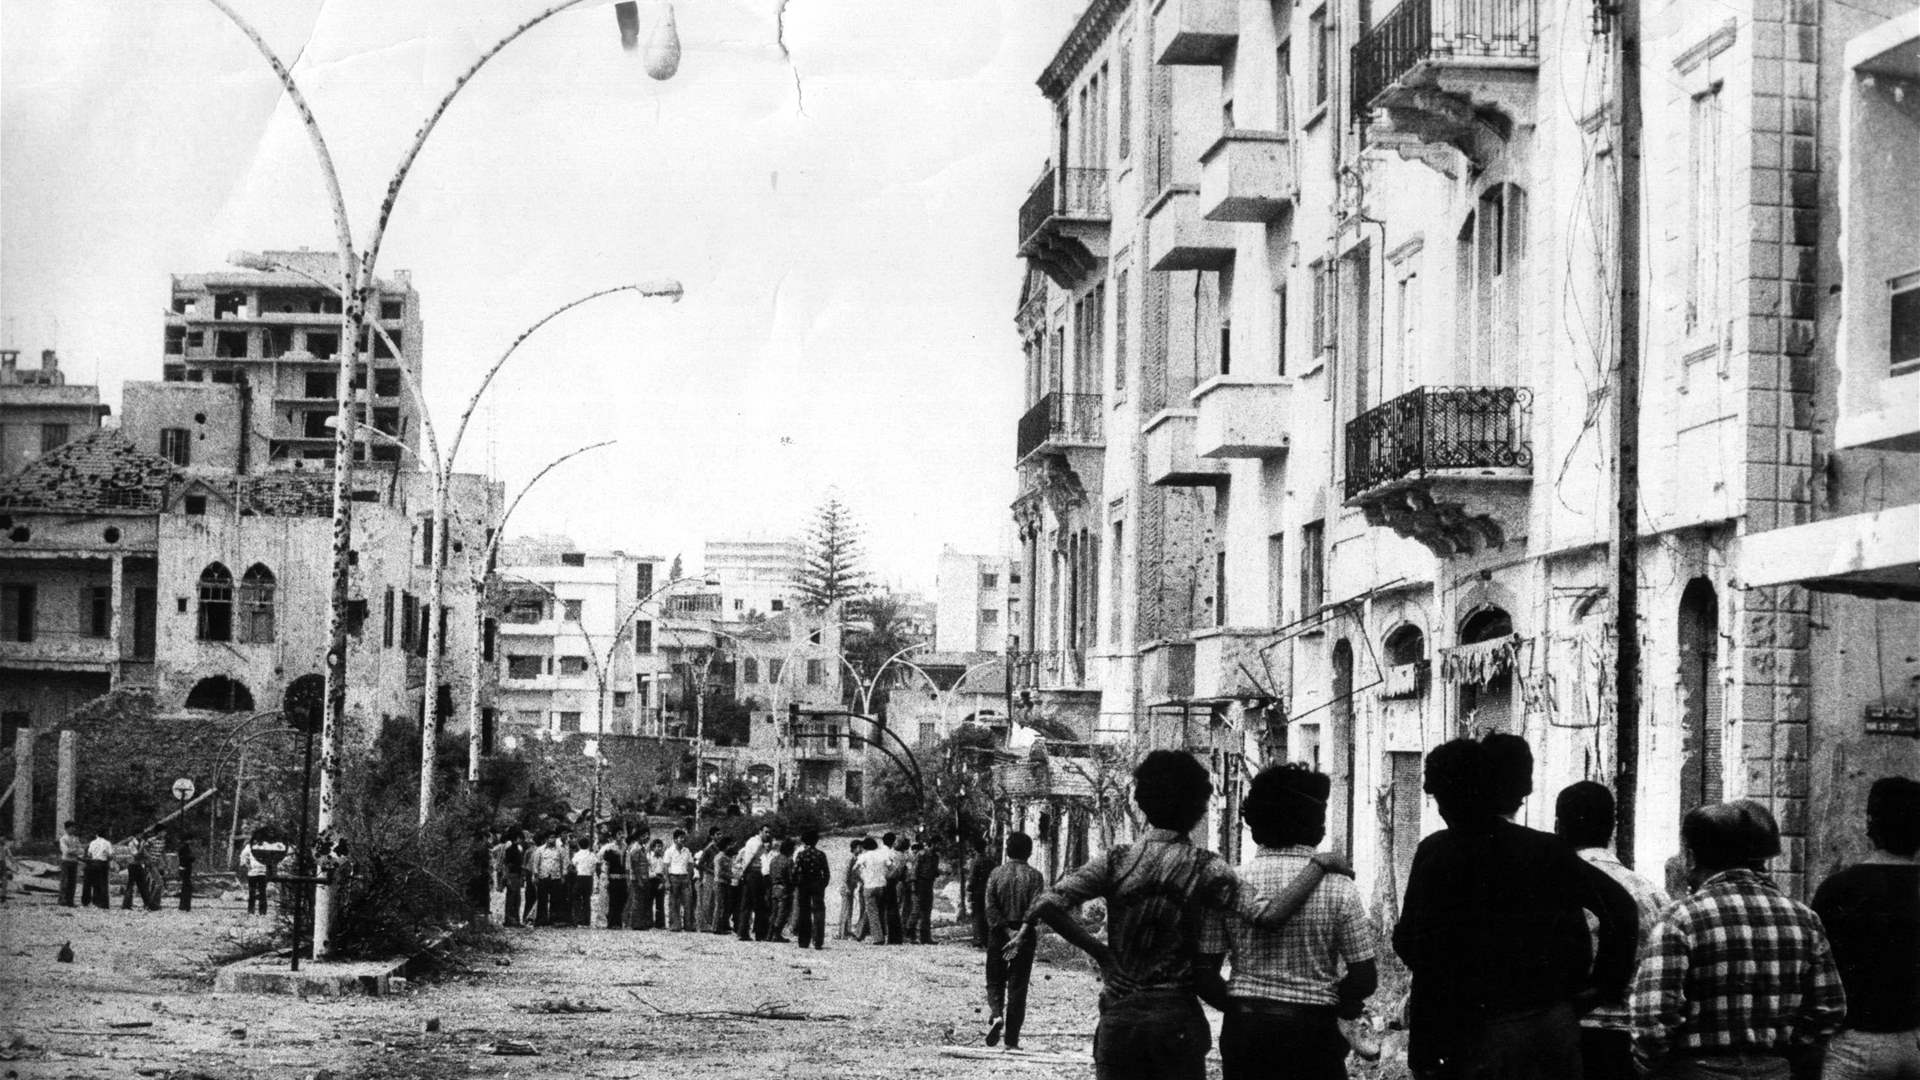 Before and after: How did Lebanon&#39;s economic history shift with the outbreak of the civil war